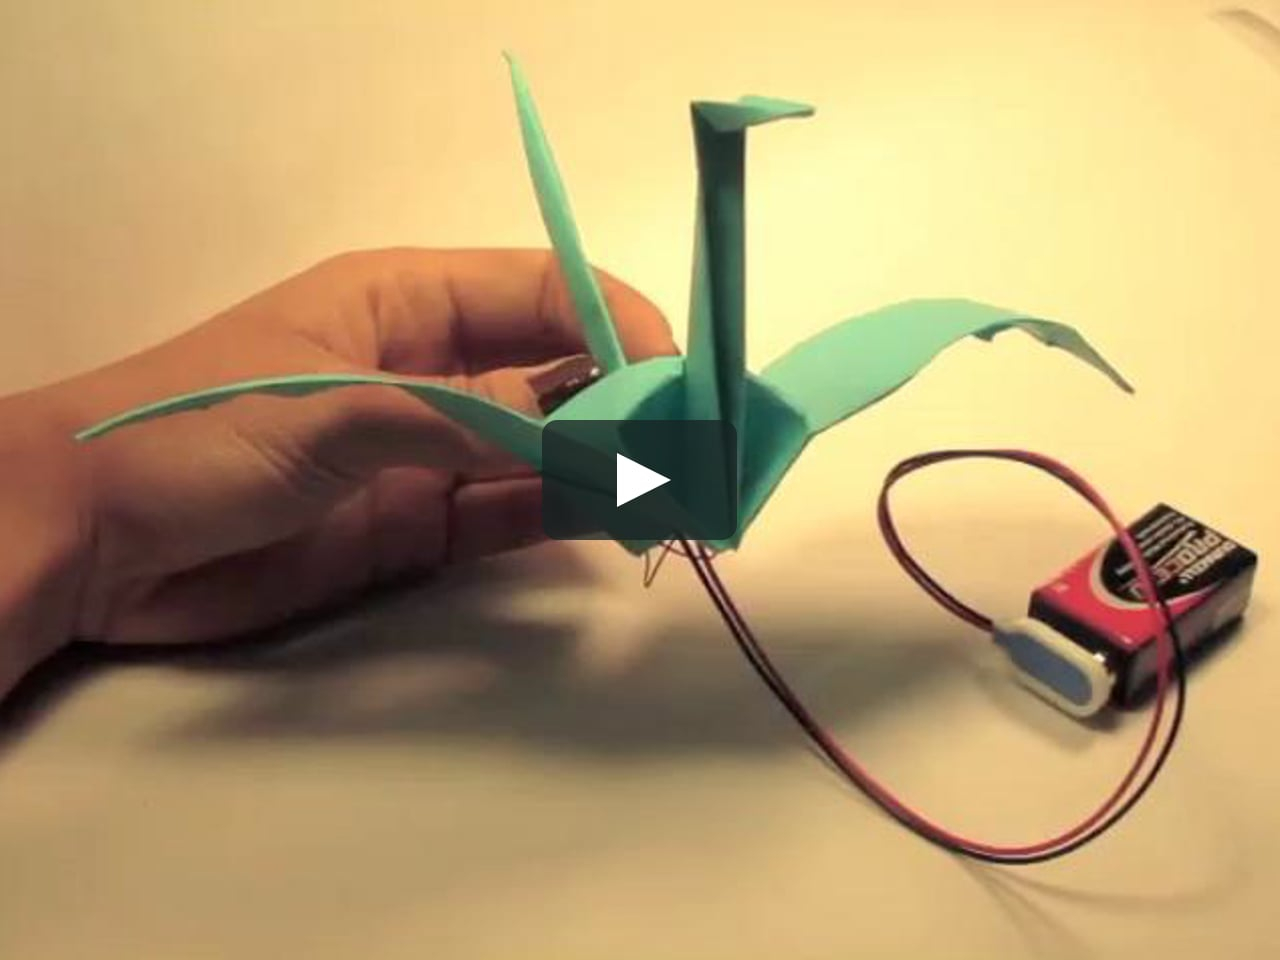 Origami Crane Flapping Electronic Origami Flapping Crane W Tutorial